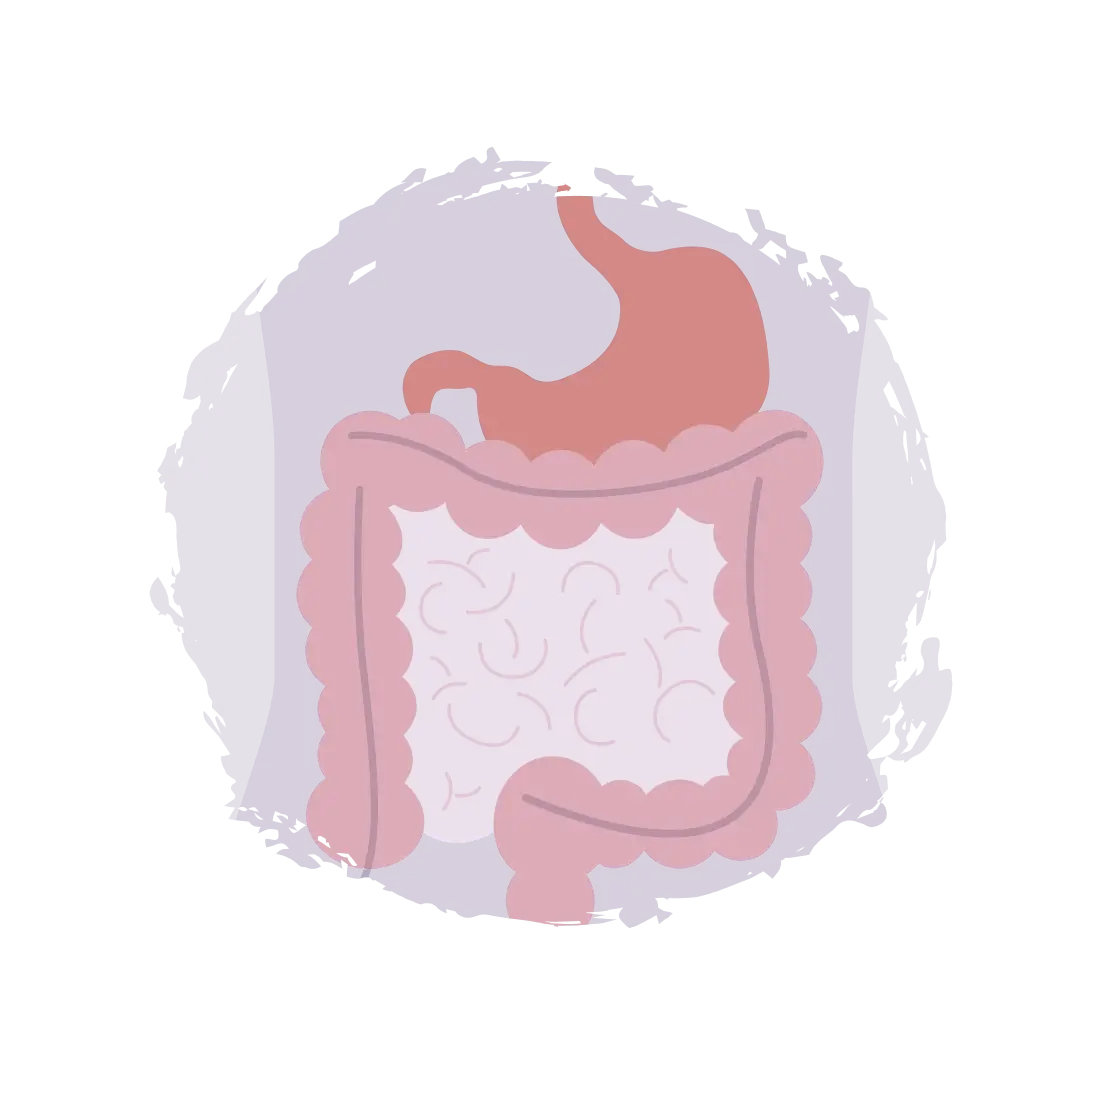 An illustrated image of the stomach and intestines